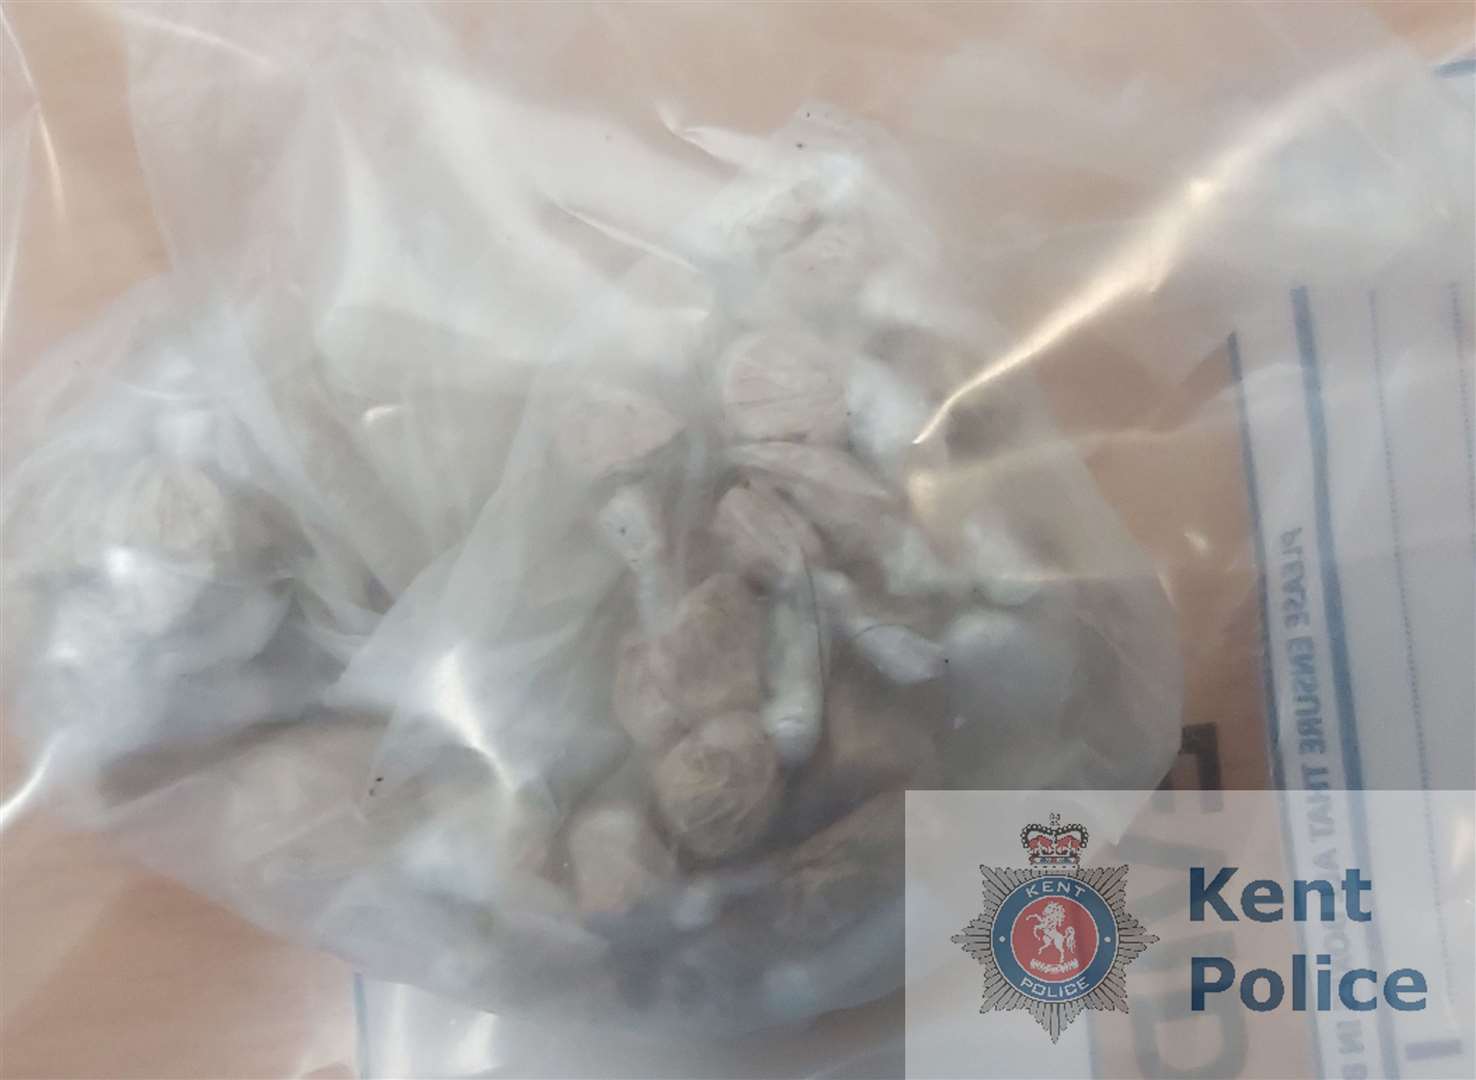 The drugs seized by police. Picture: Kent Police